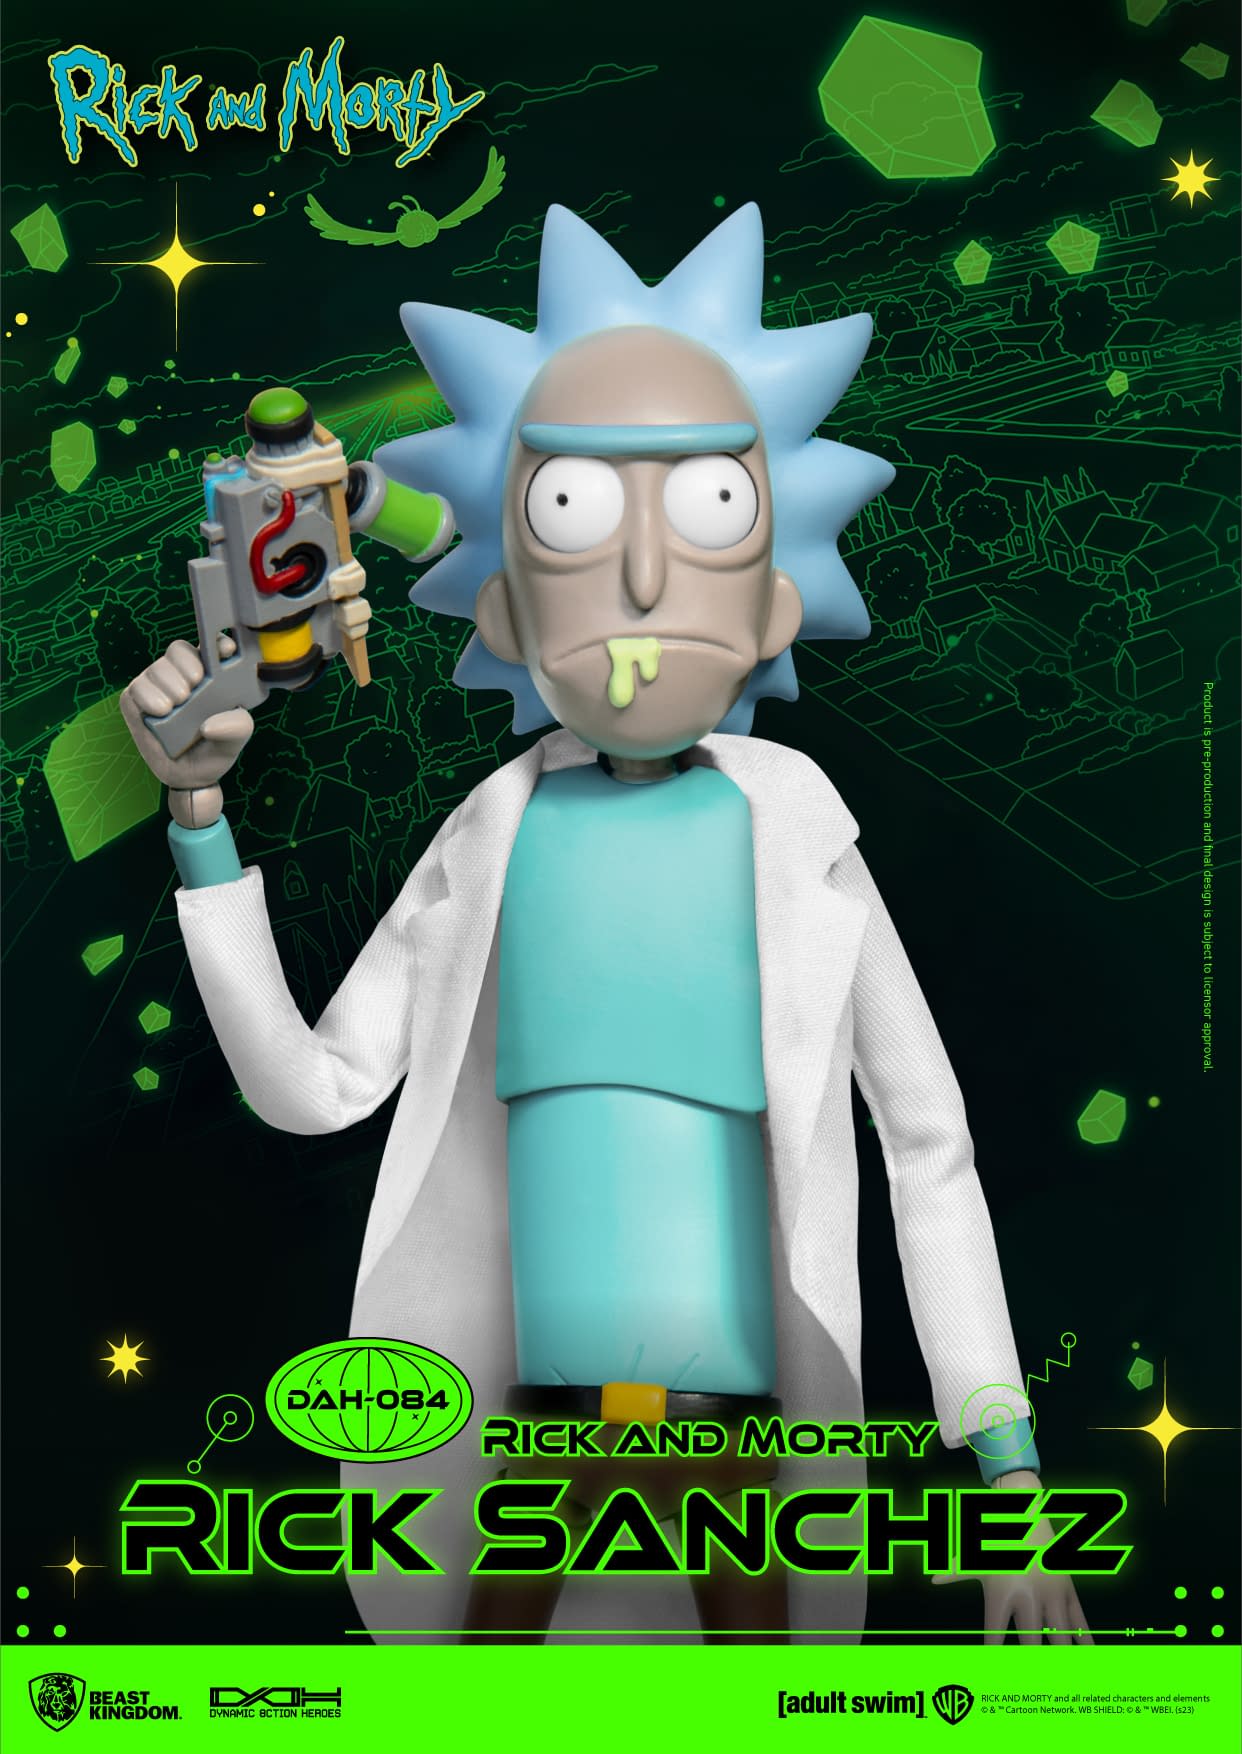 Get Schwifty with Beast Kingdom New Rick and Morty DAH Figures